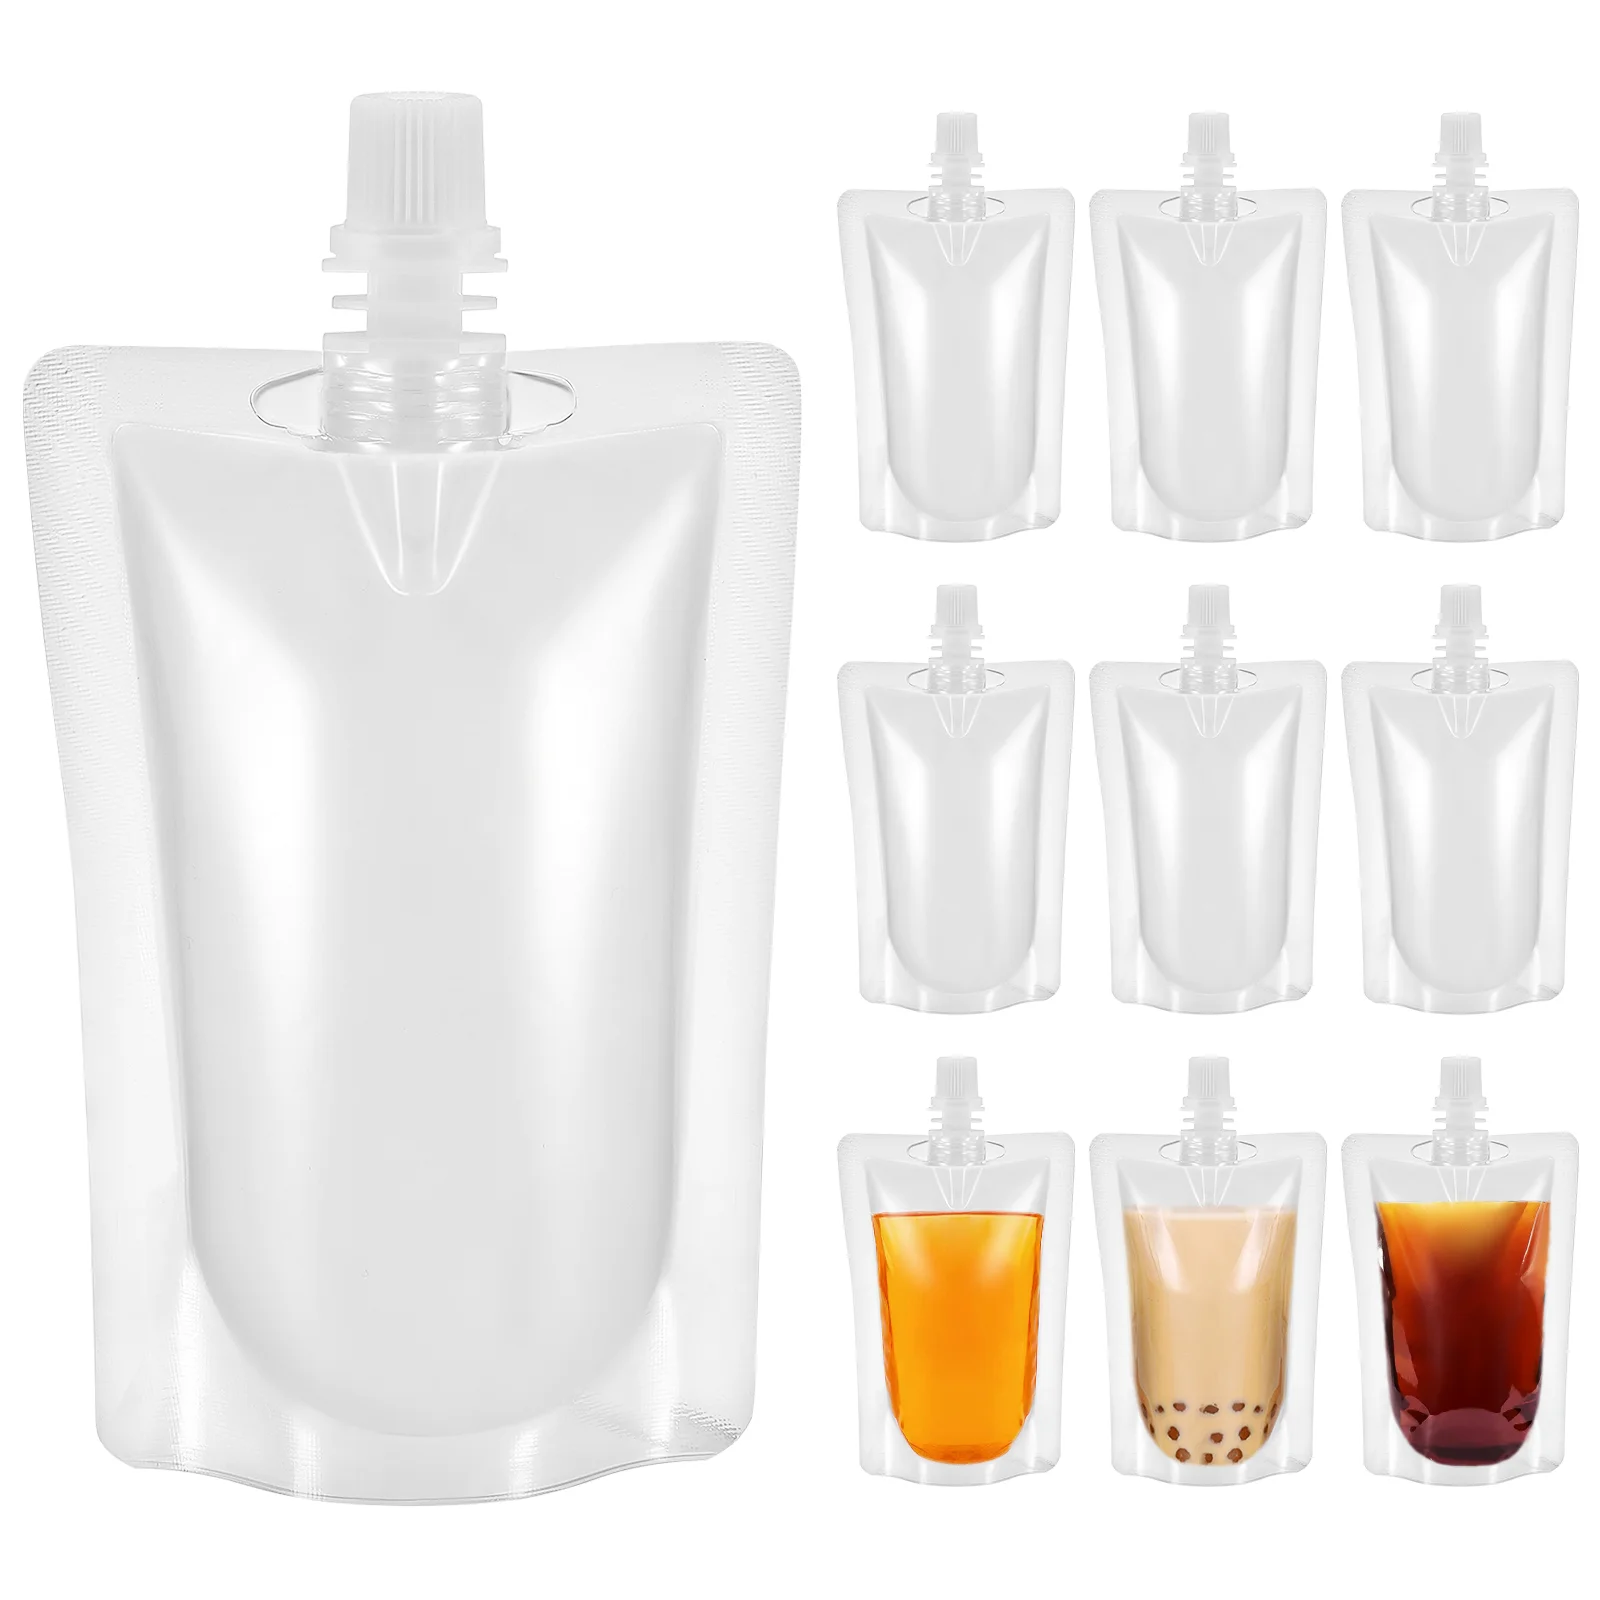 

50 Pcs Plastic Flask Portable Water Kettle Spout Pouch Reusable Drink Pouches Rum Runners Cruise Travel Container